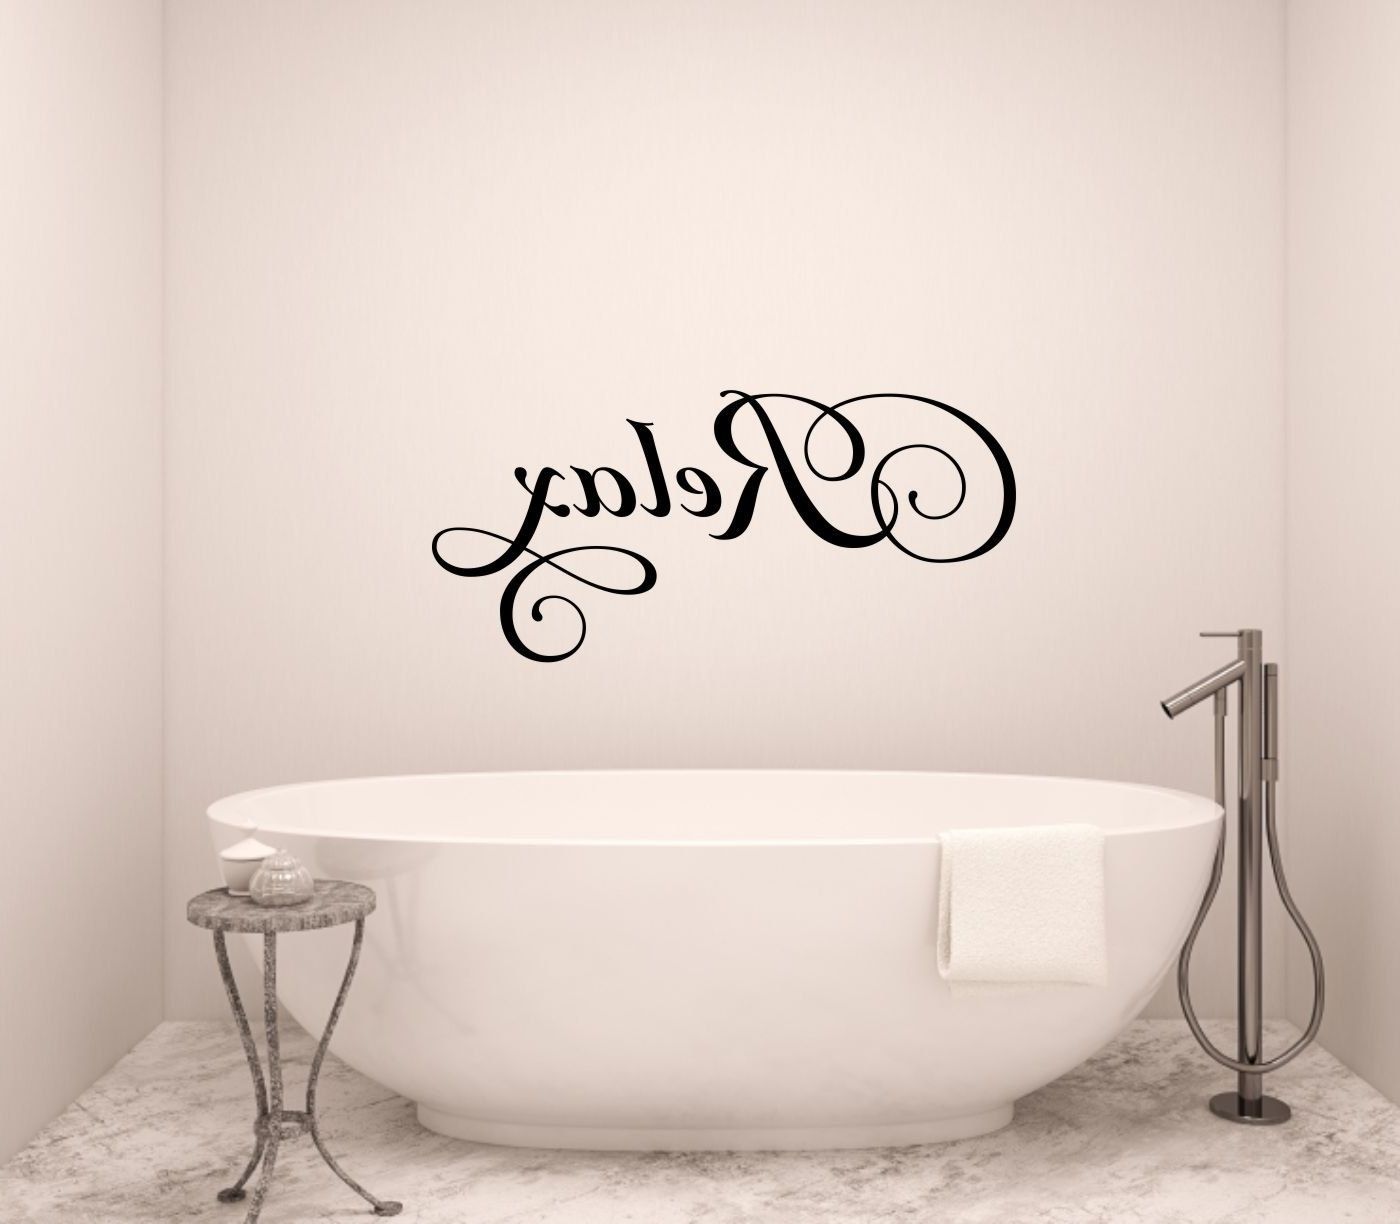 Relax Wall Decal Bathroom Wall Decal Bathroom Vinyl Decal Bathroom Regarding Recent Relax Wall Art (View 17 of 20)